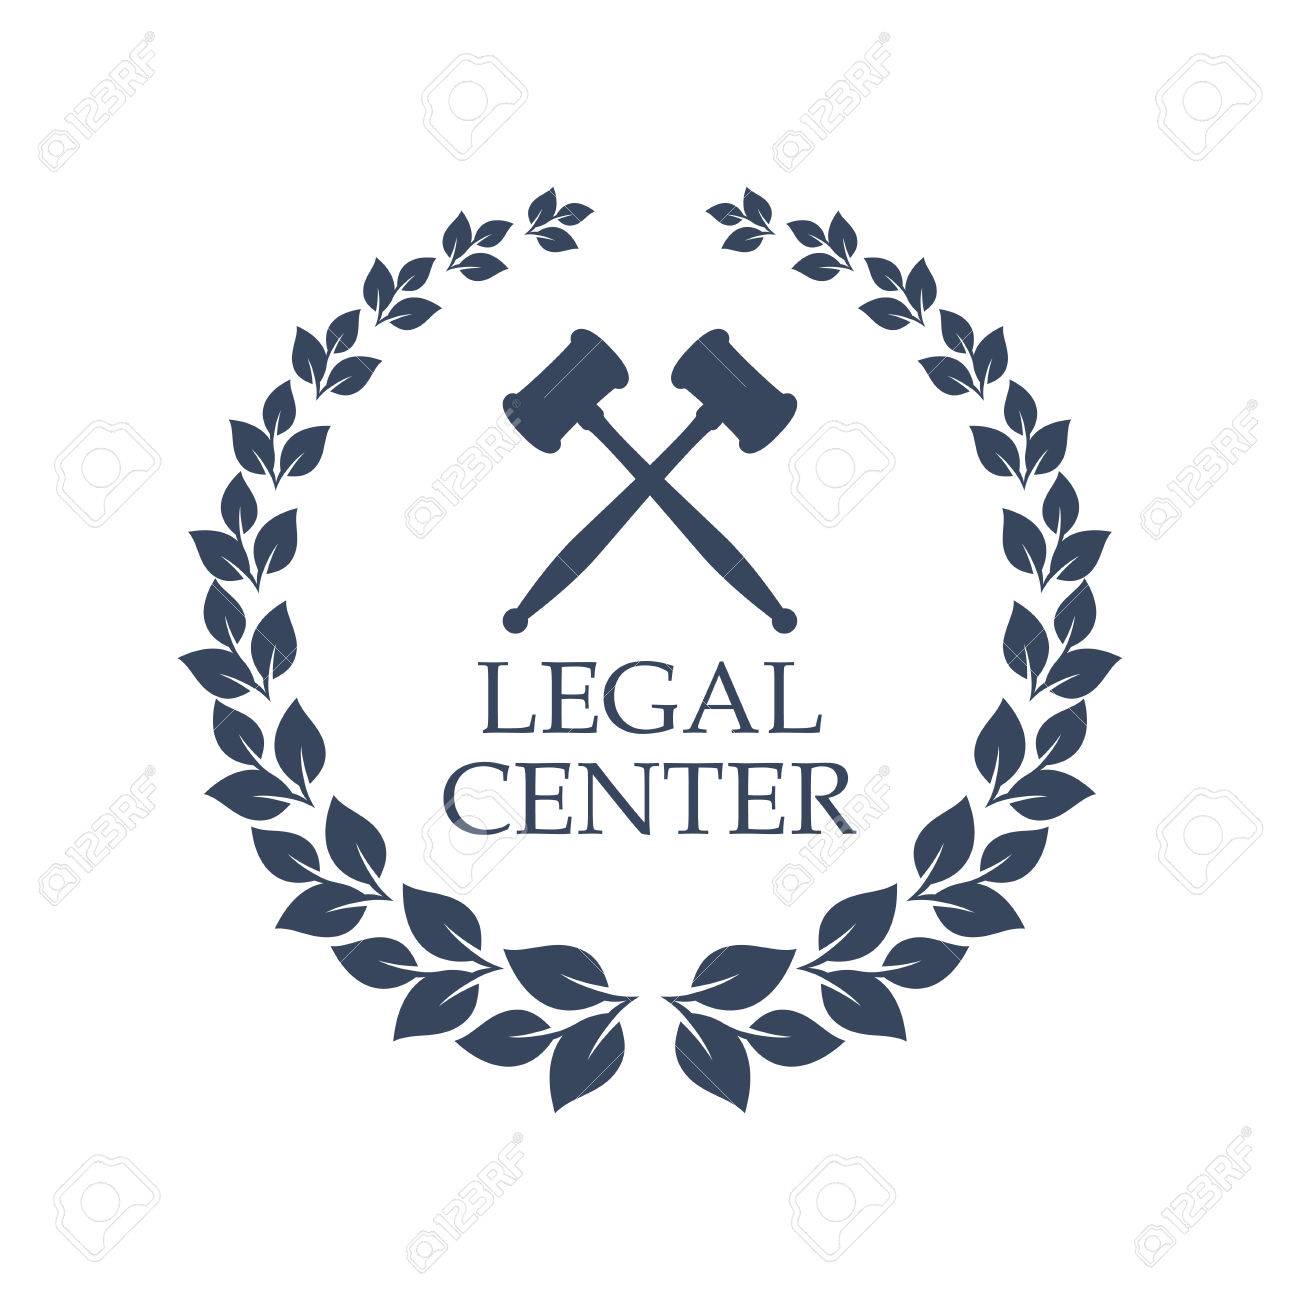 Juridical or legal advocacy center icon with Scales of Justice 